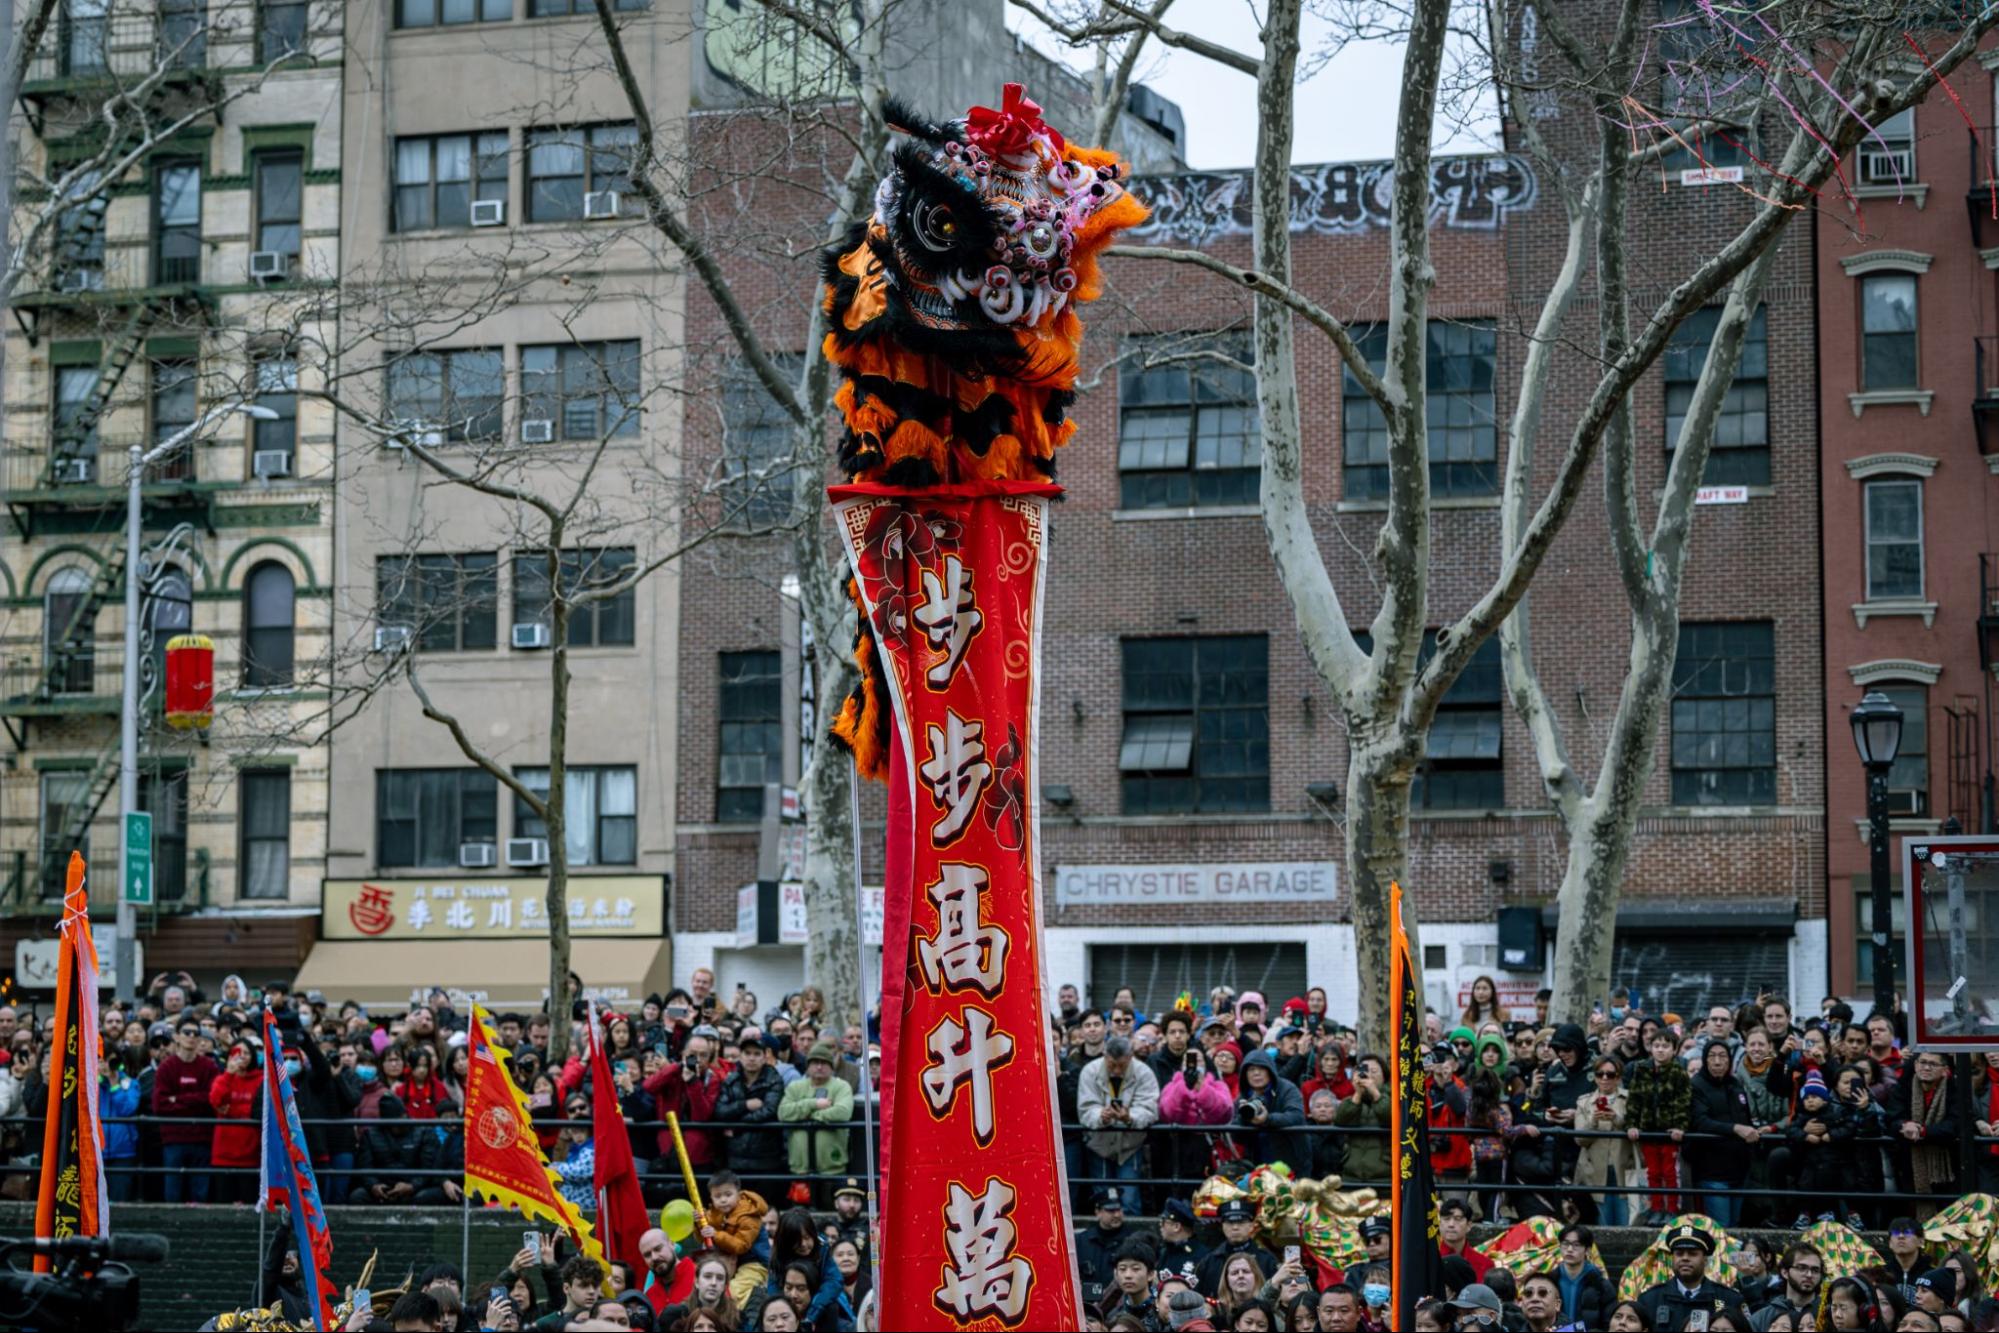 A lion dancer stands on a pole in the center of a stage. Tens of people are watching the lion dancer unravel a long red scroll with white Chinese characters.